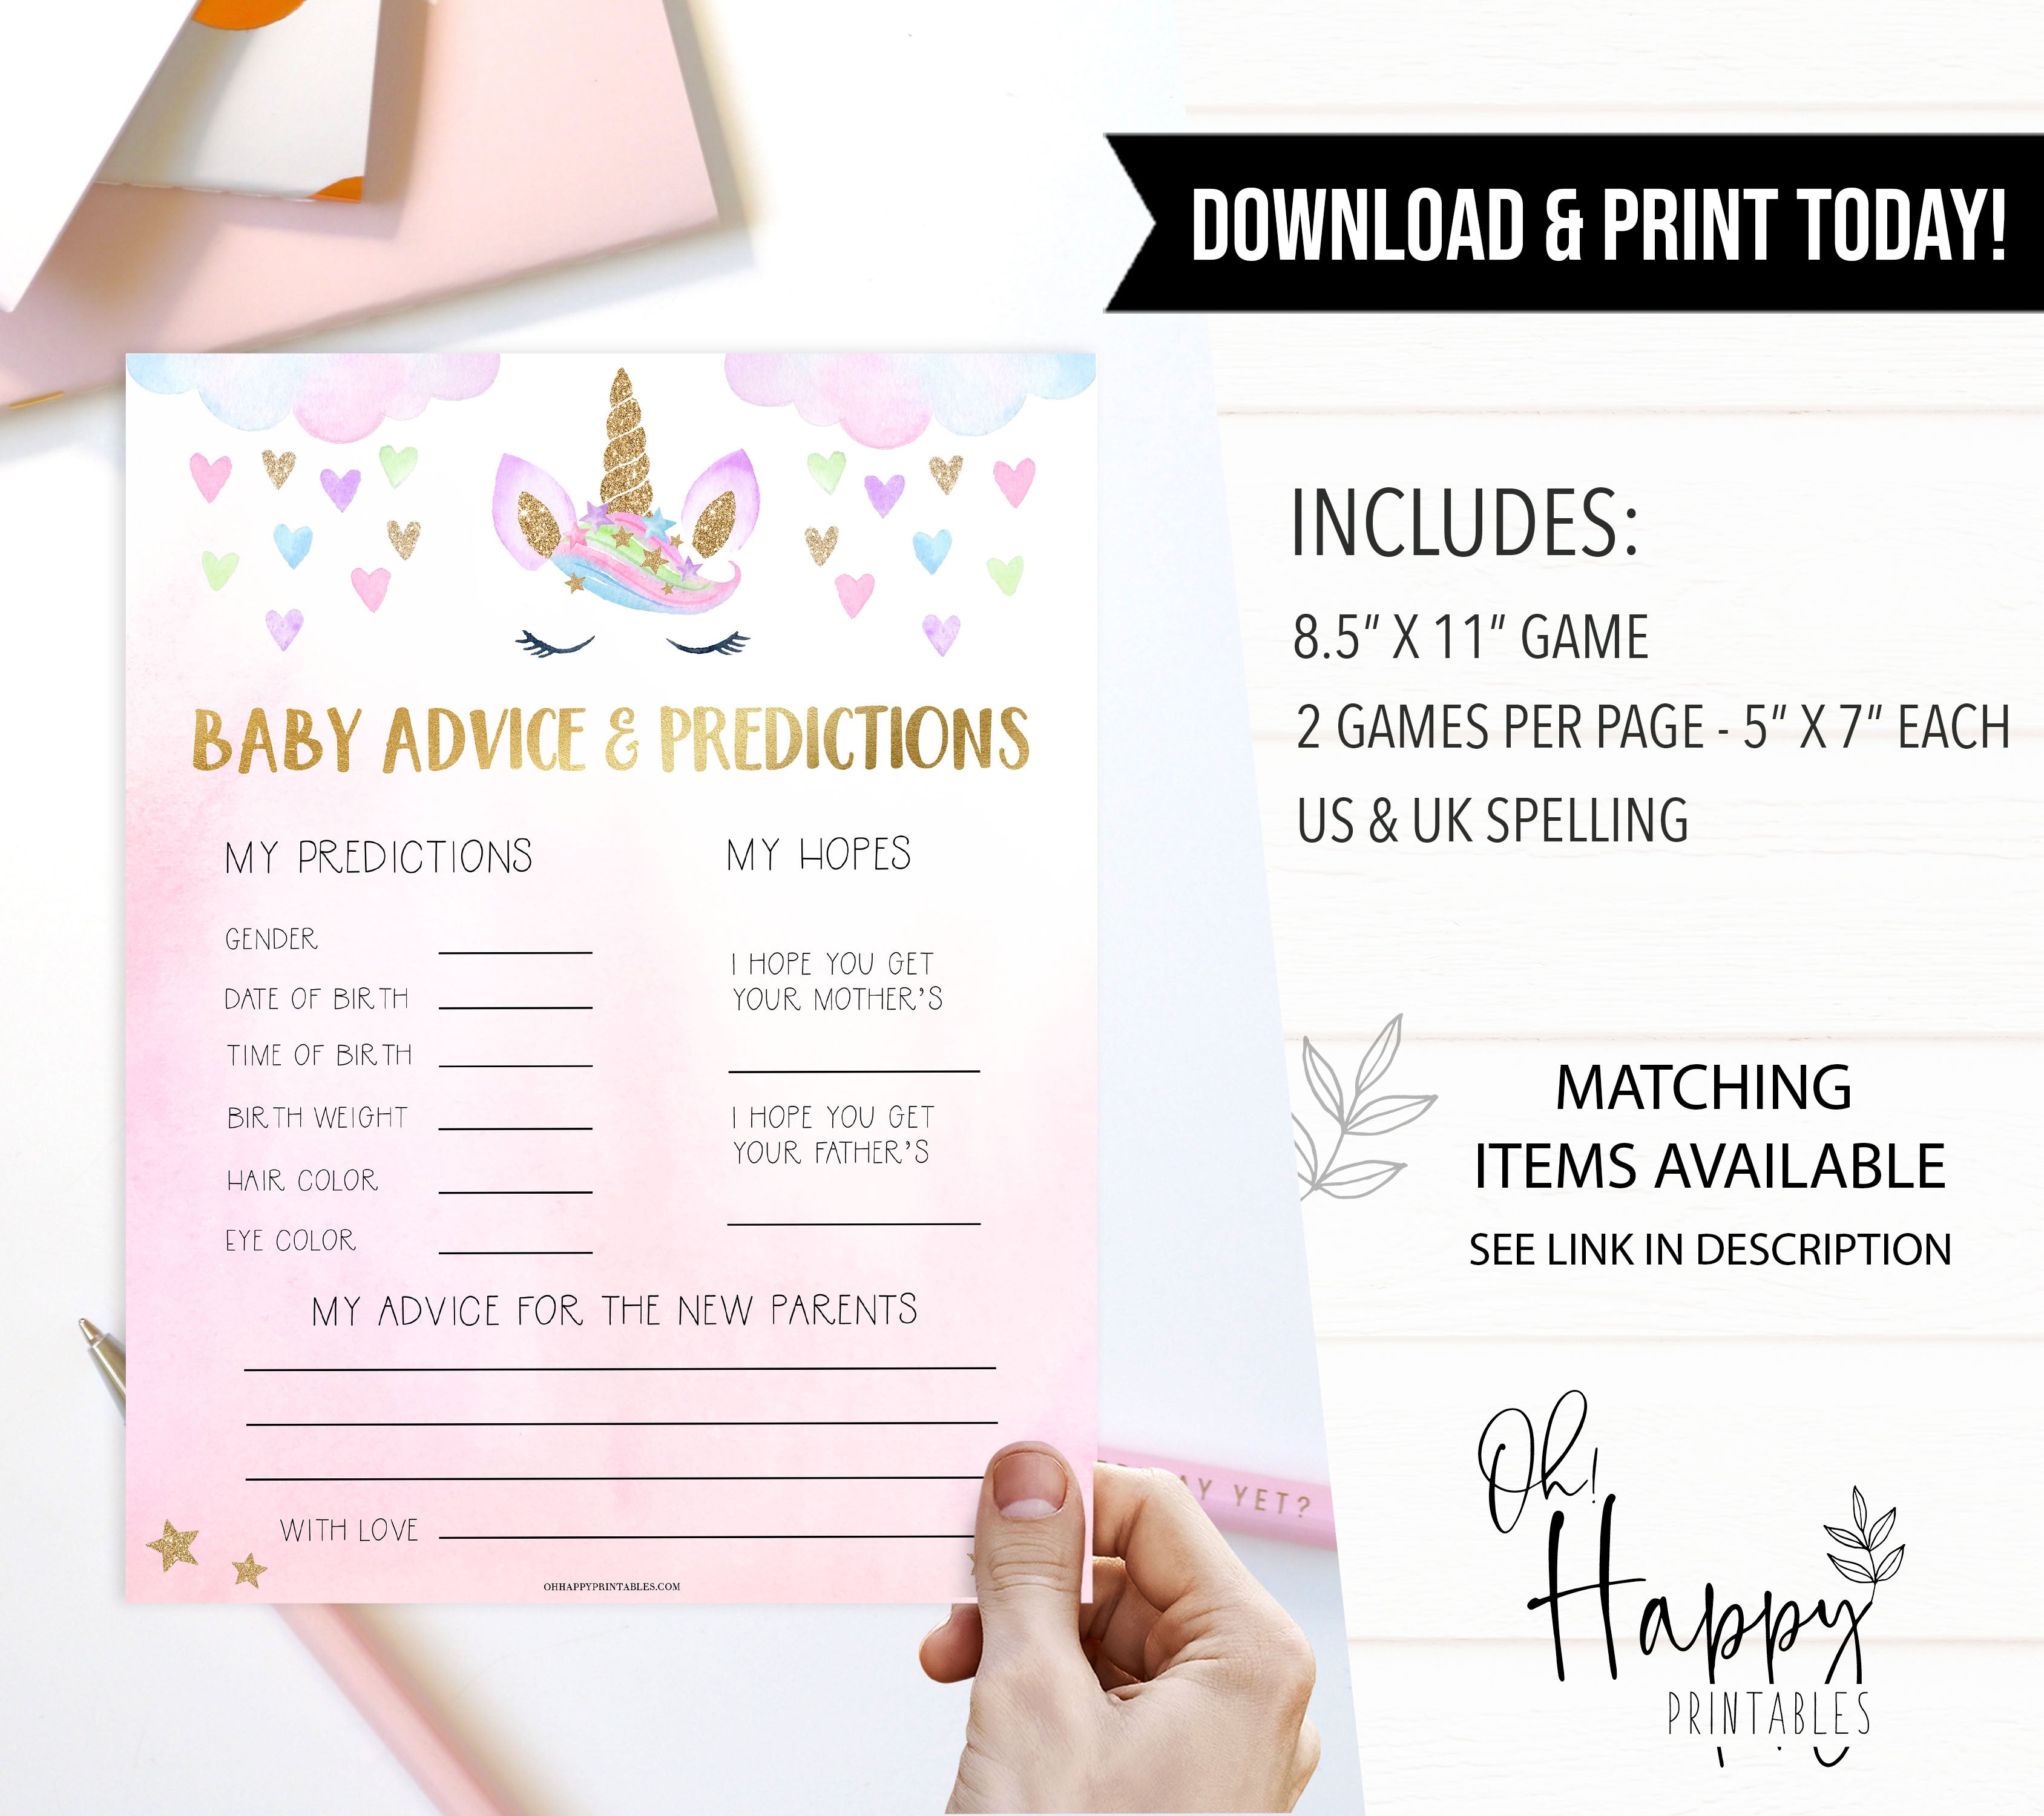 baby advice and predictions keepsake, Printable baby shower games, unicorn baby games, baby shower games, fun baby shower ideas, top baby shower ideas, unicorn baby shower, baby shower games, fun unicorn baby shower ideas